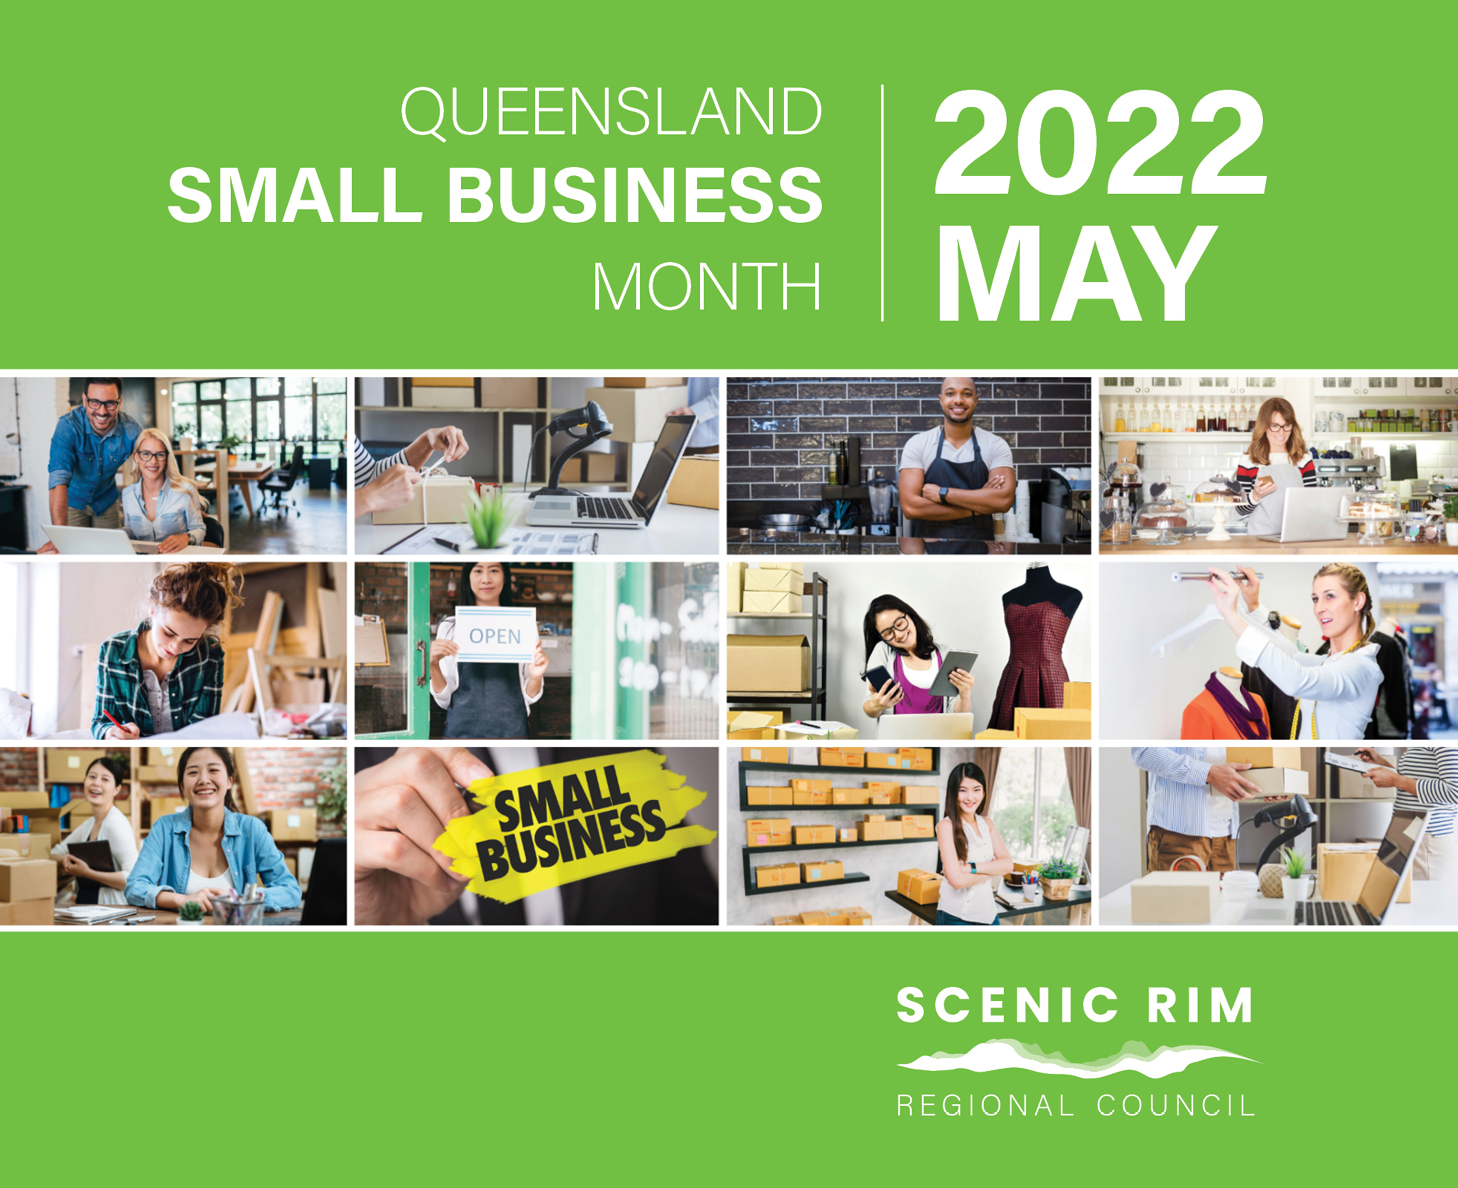 Queensland Small Business Month 2022